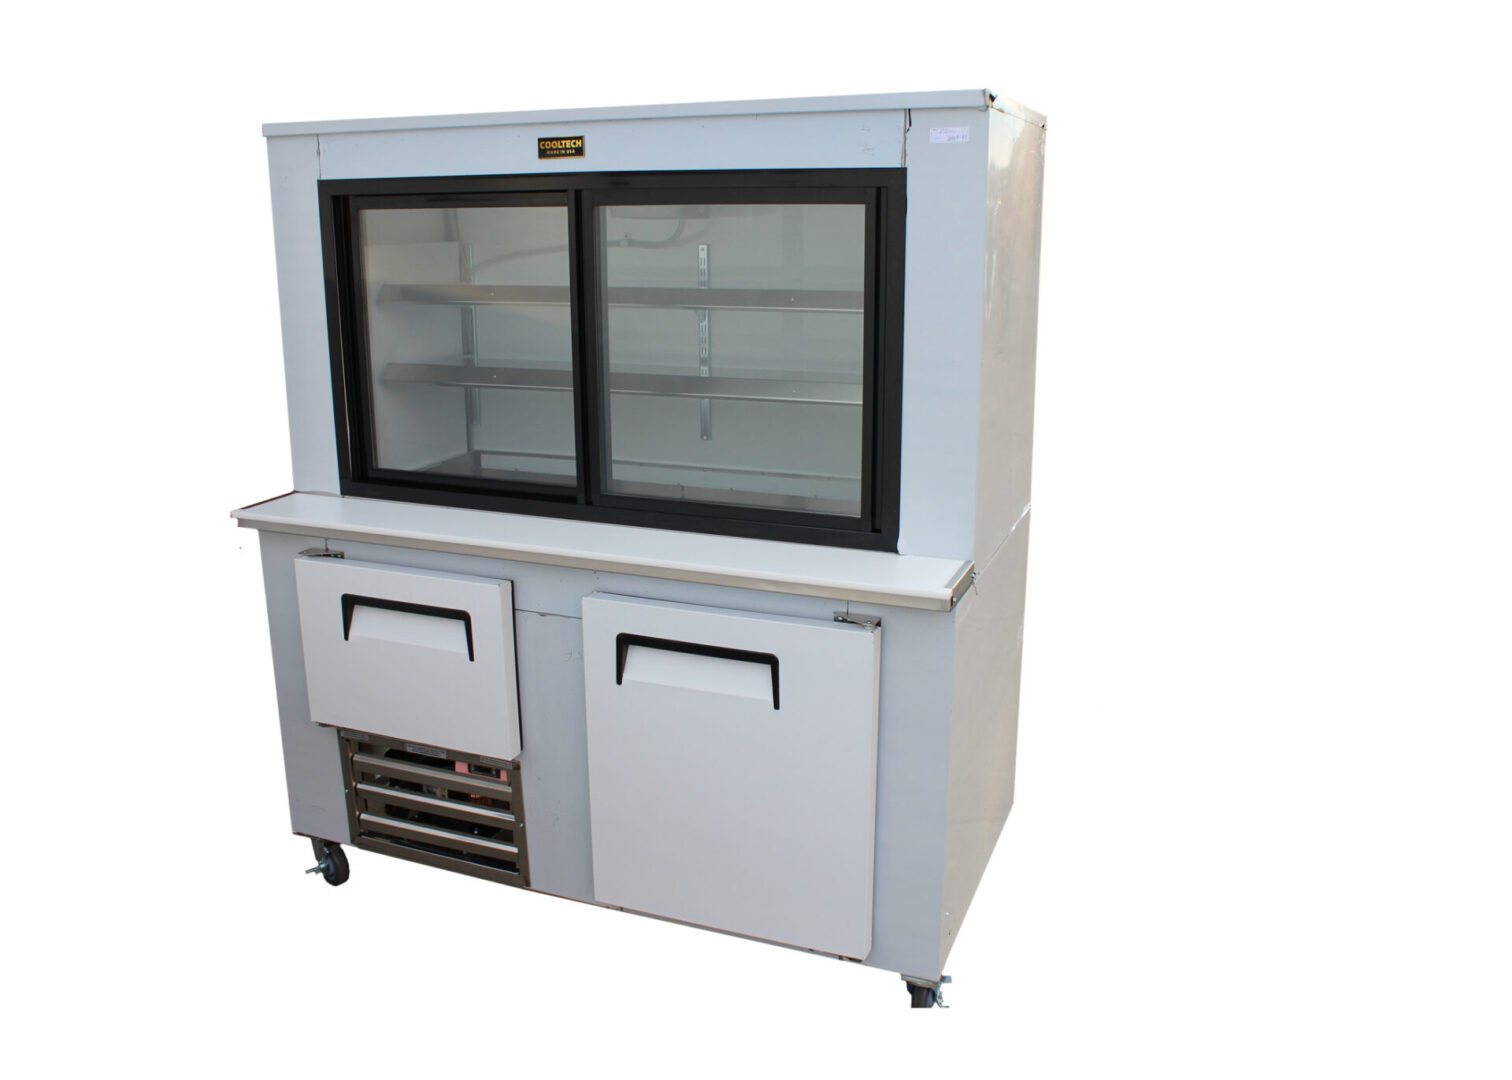 Cooltech Stainless Steel Refrigerated Pie Case 36” with sliding glass doors on top and two closed cabinets at the bottom, isolated on a white background.